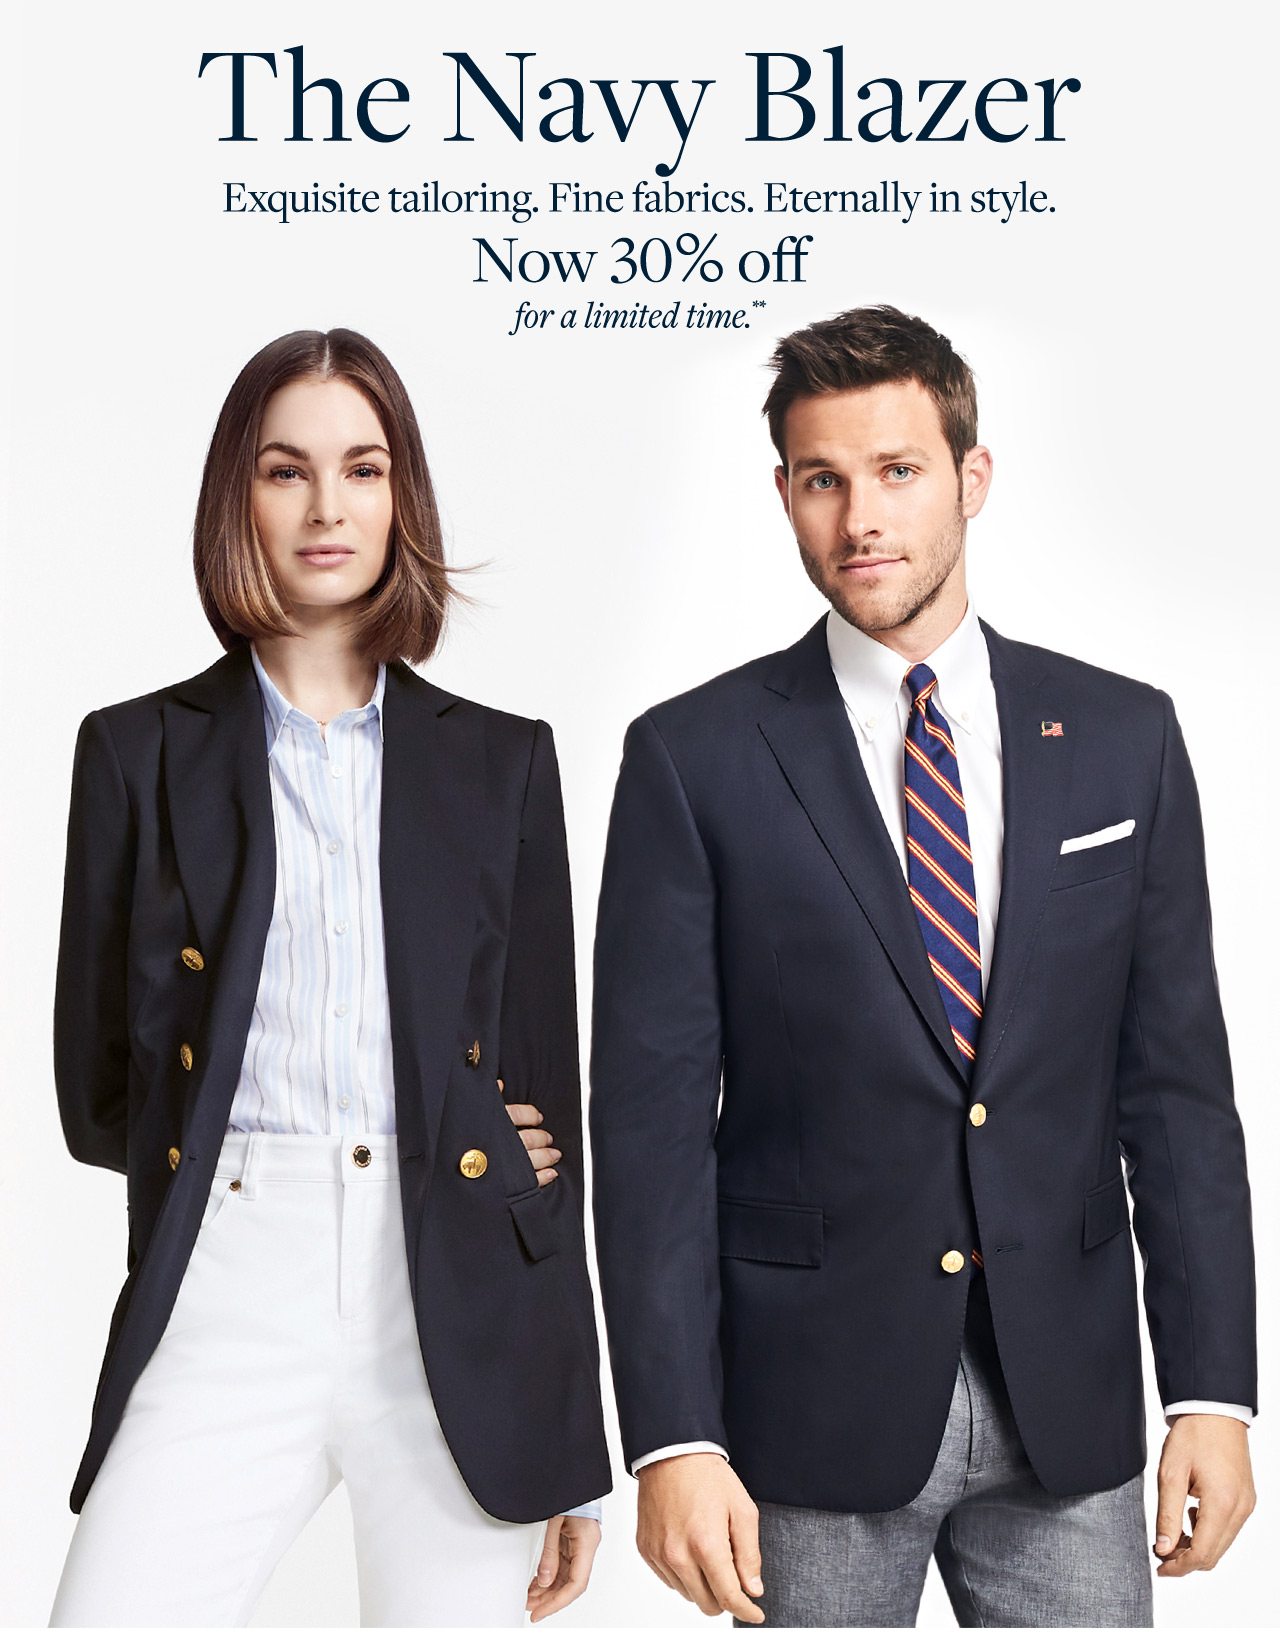 The Navy Blazer Exquisite tailoring. Fine fabrics. Eternally in style. Now 30% off for a limited time.